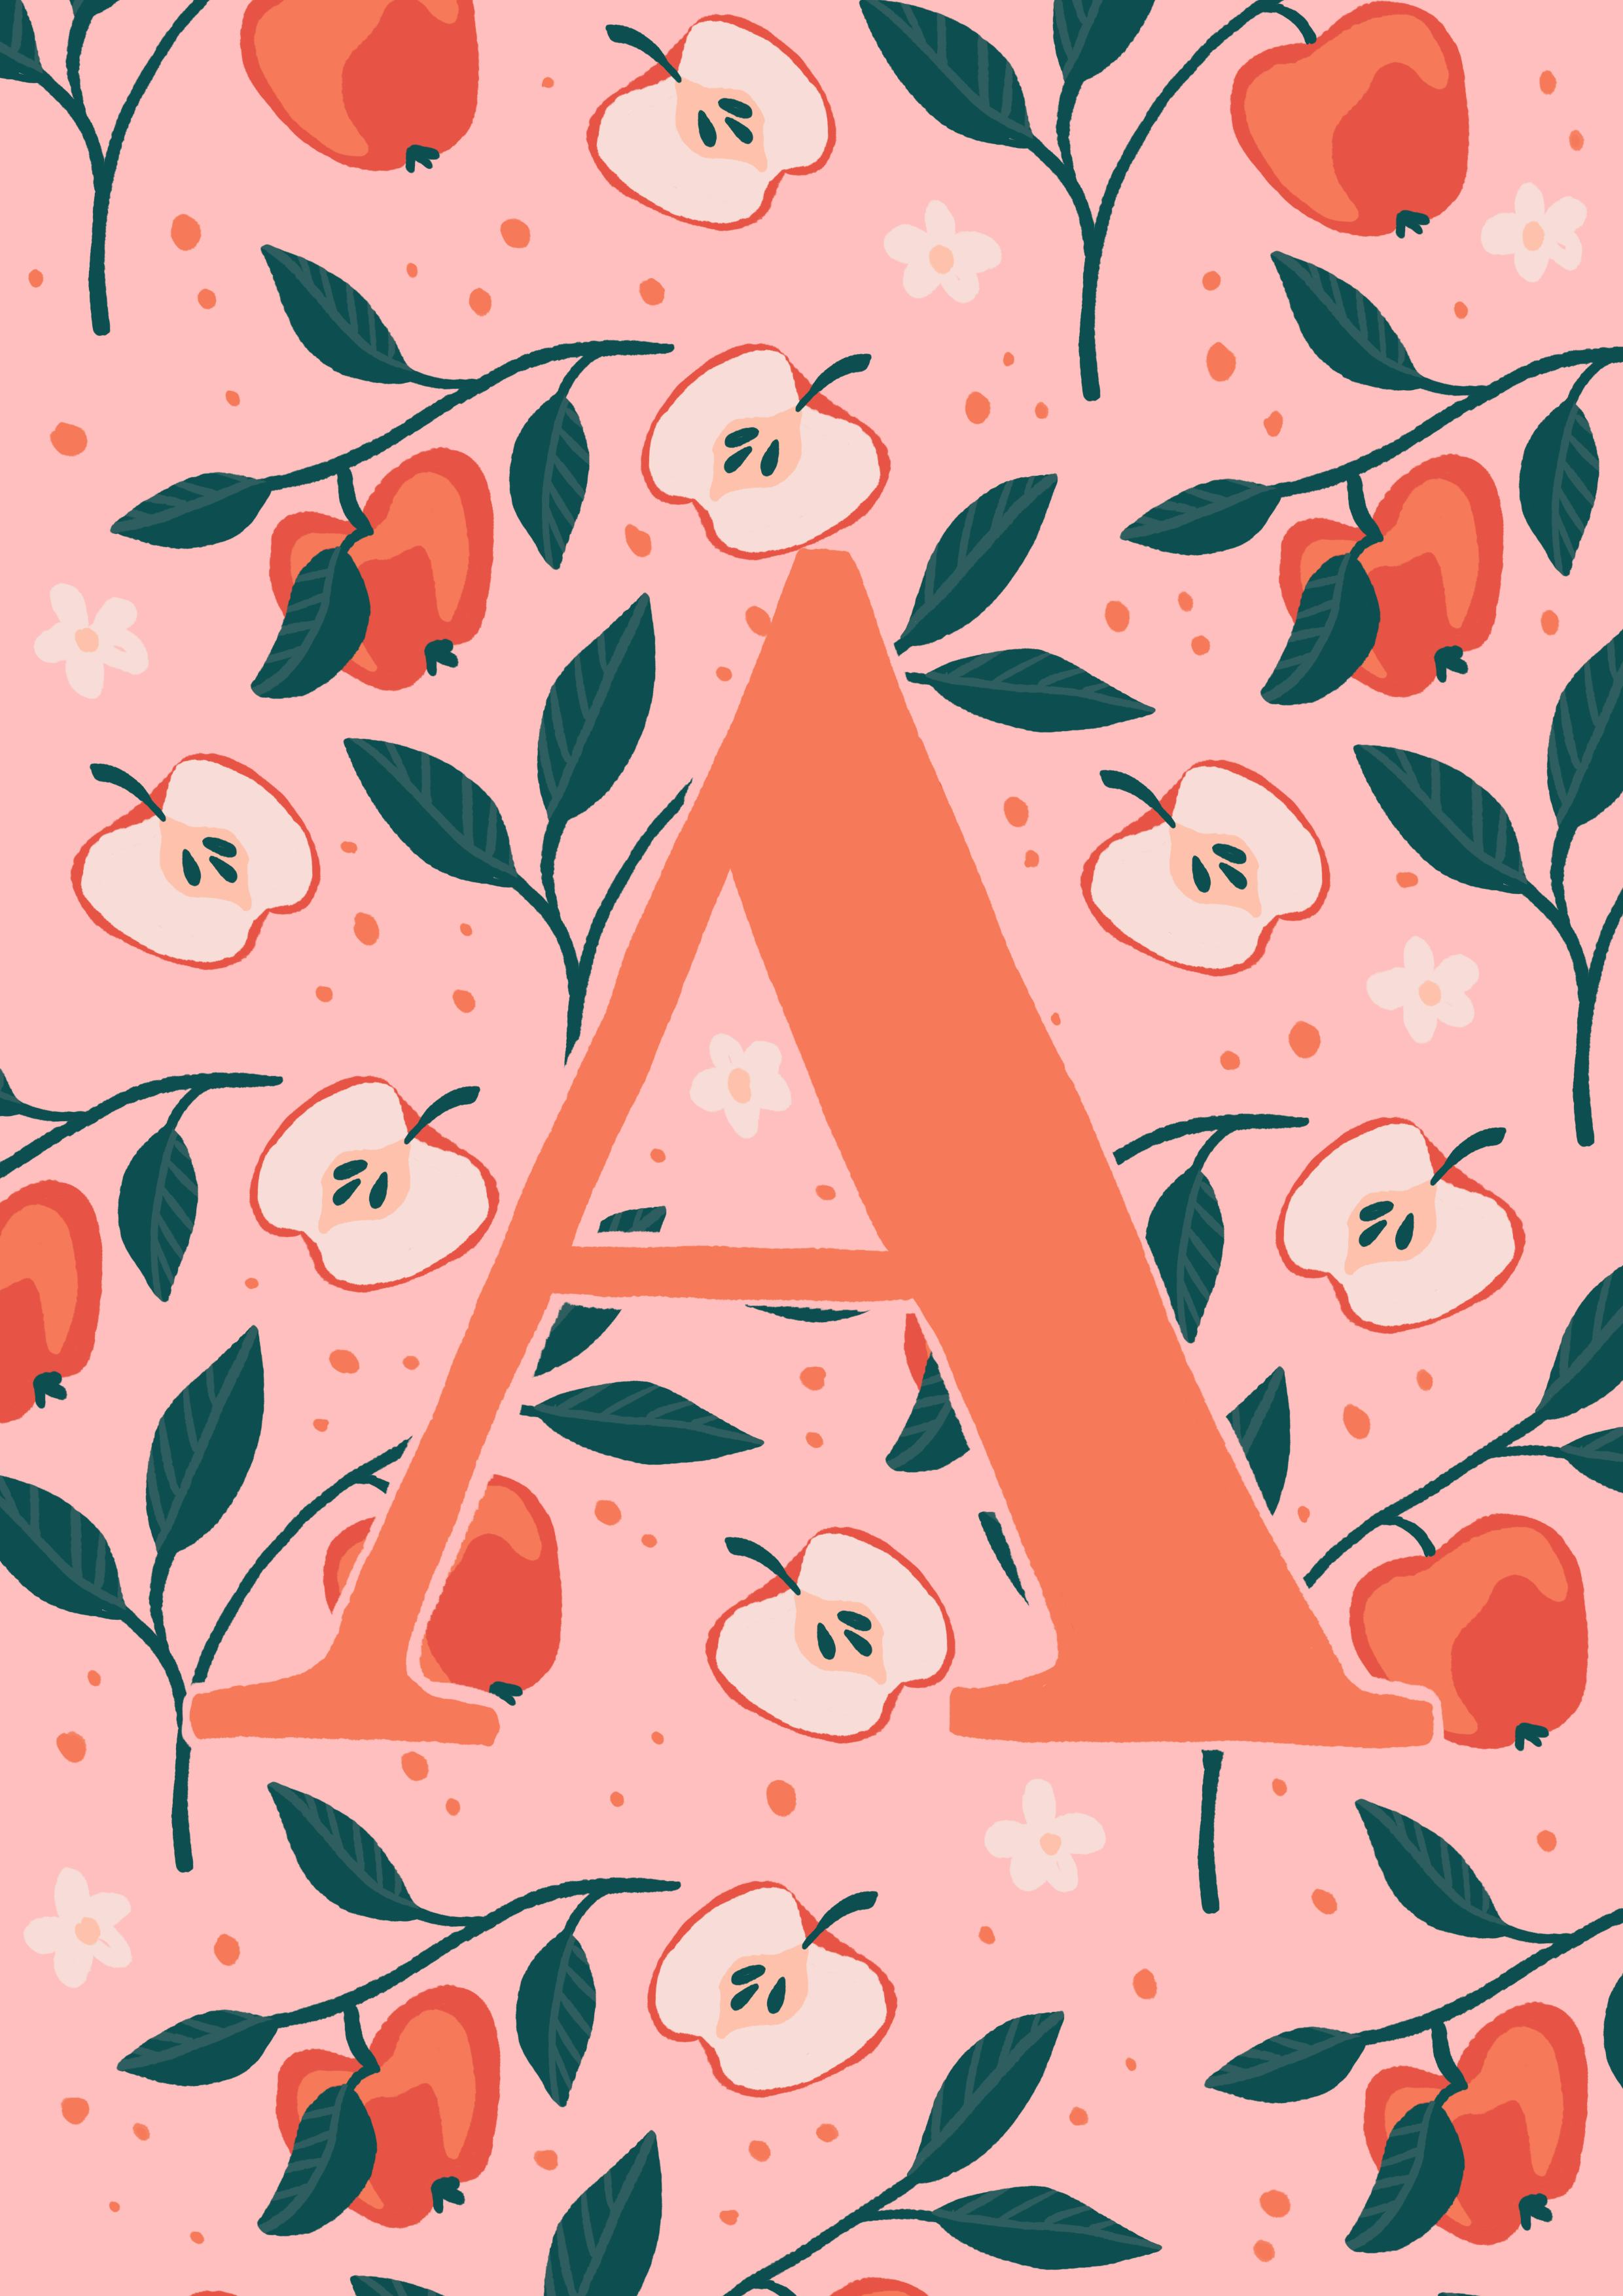 Letter A on a background of illustrated apples